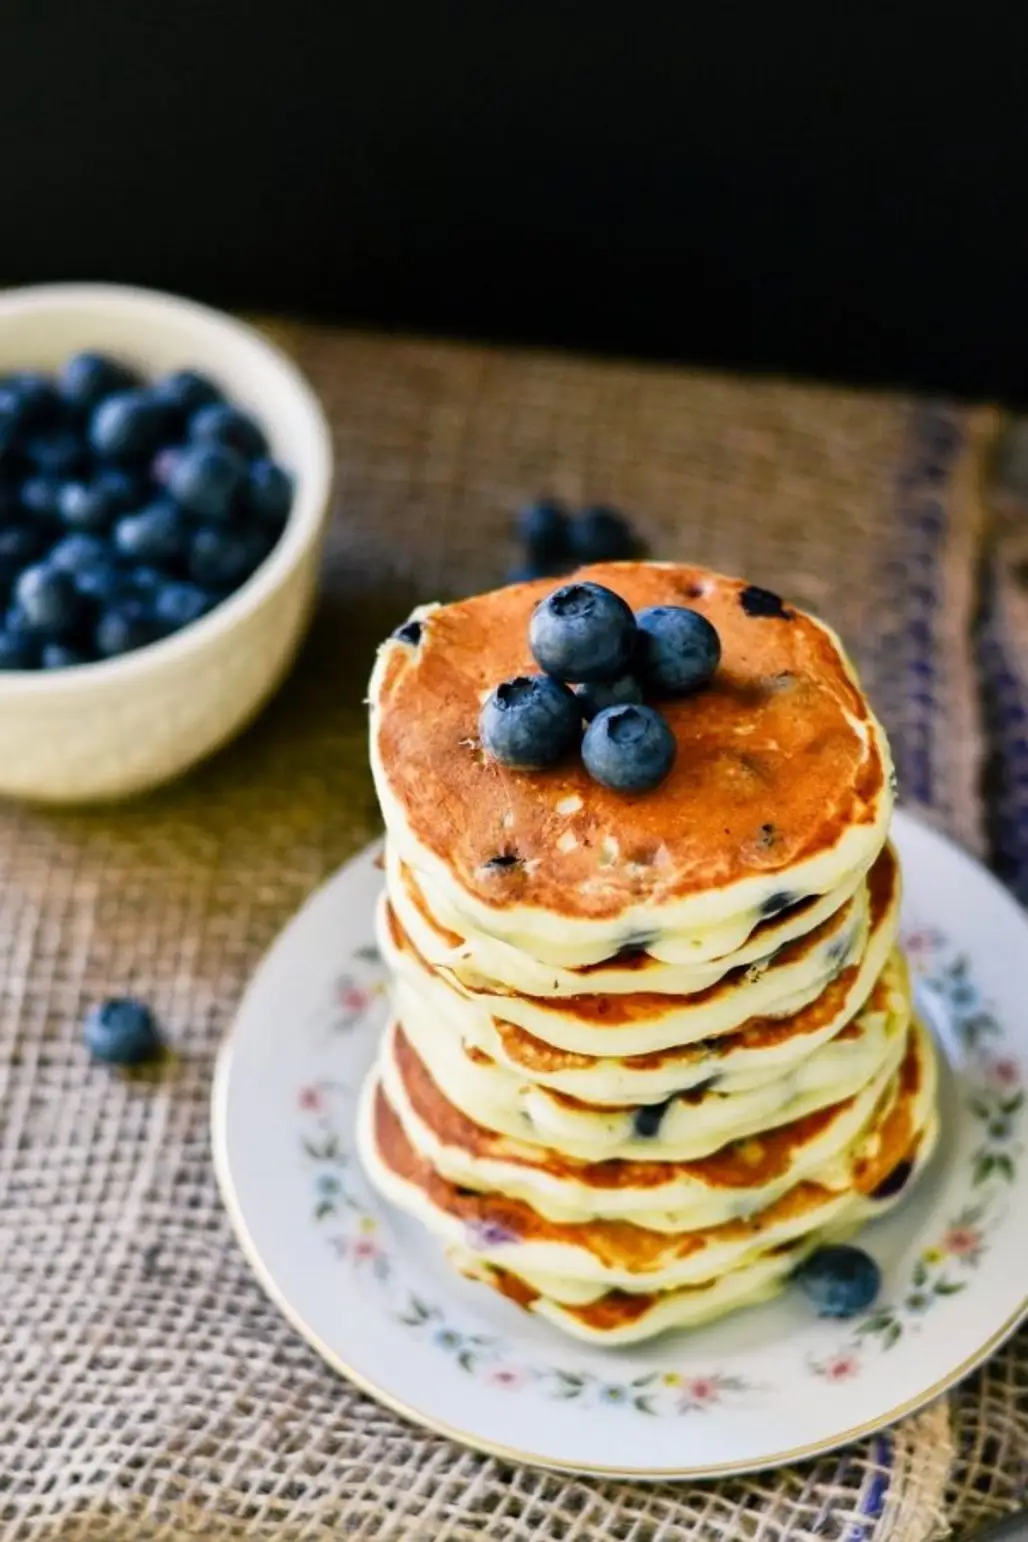 Blueberry Pancakes with Warm Blueberry Sauce